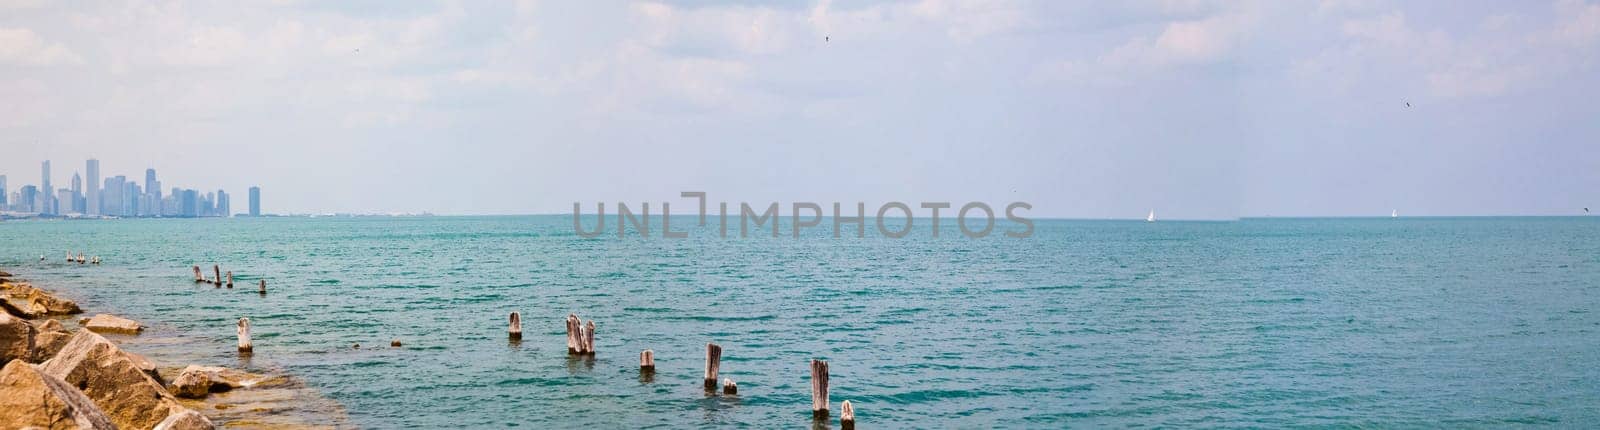 Tranquil Waterscape: Serene lake panorama with Chicago skyline as a majestic backdrop, capturing the peaceful harmony of urban nature in Illinois